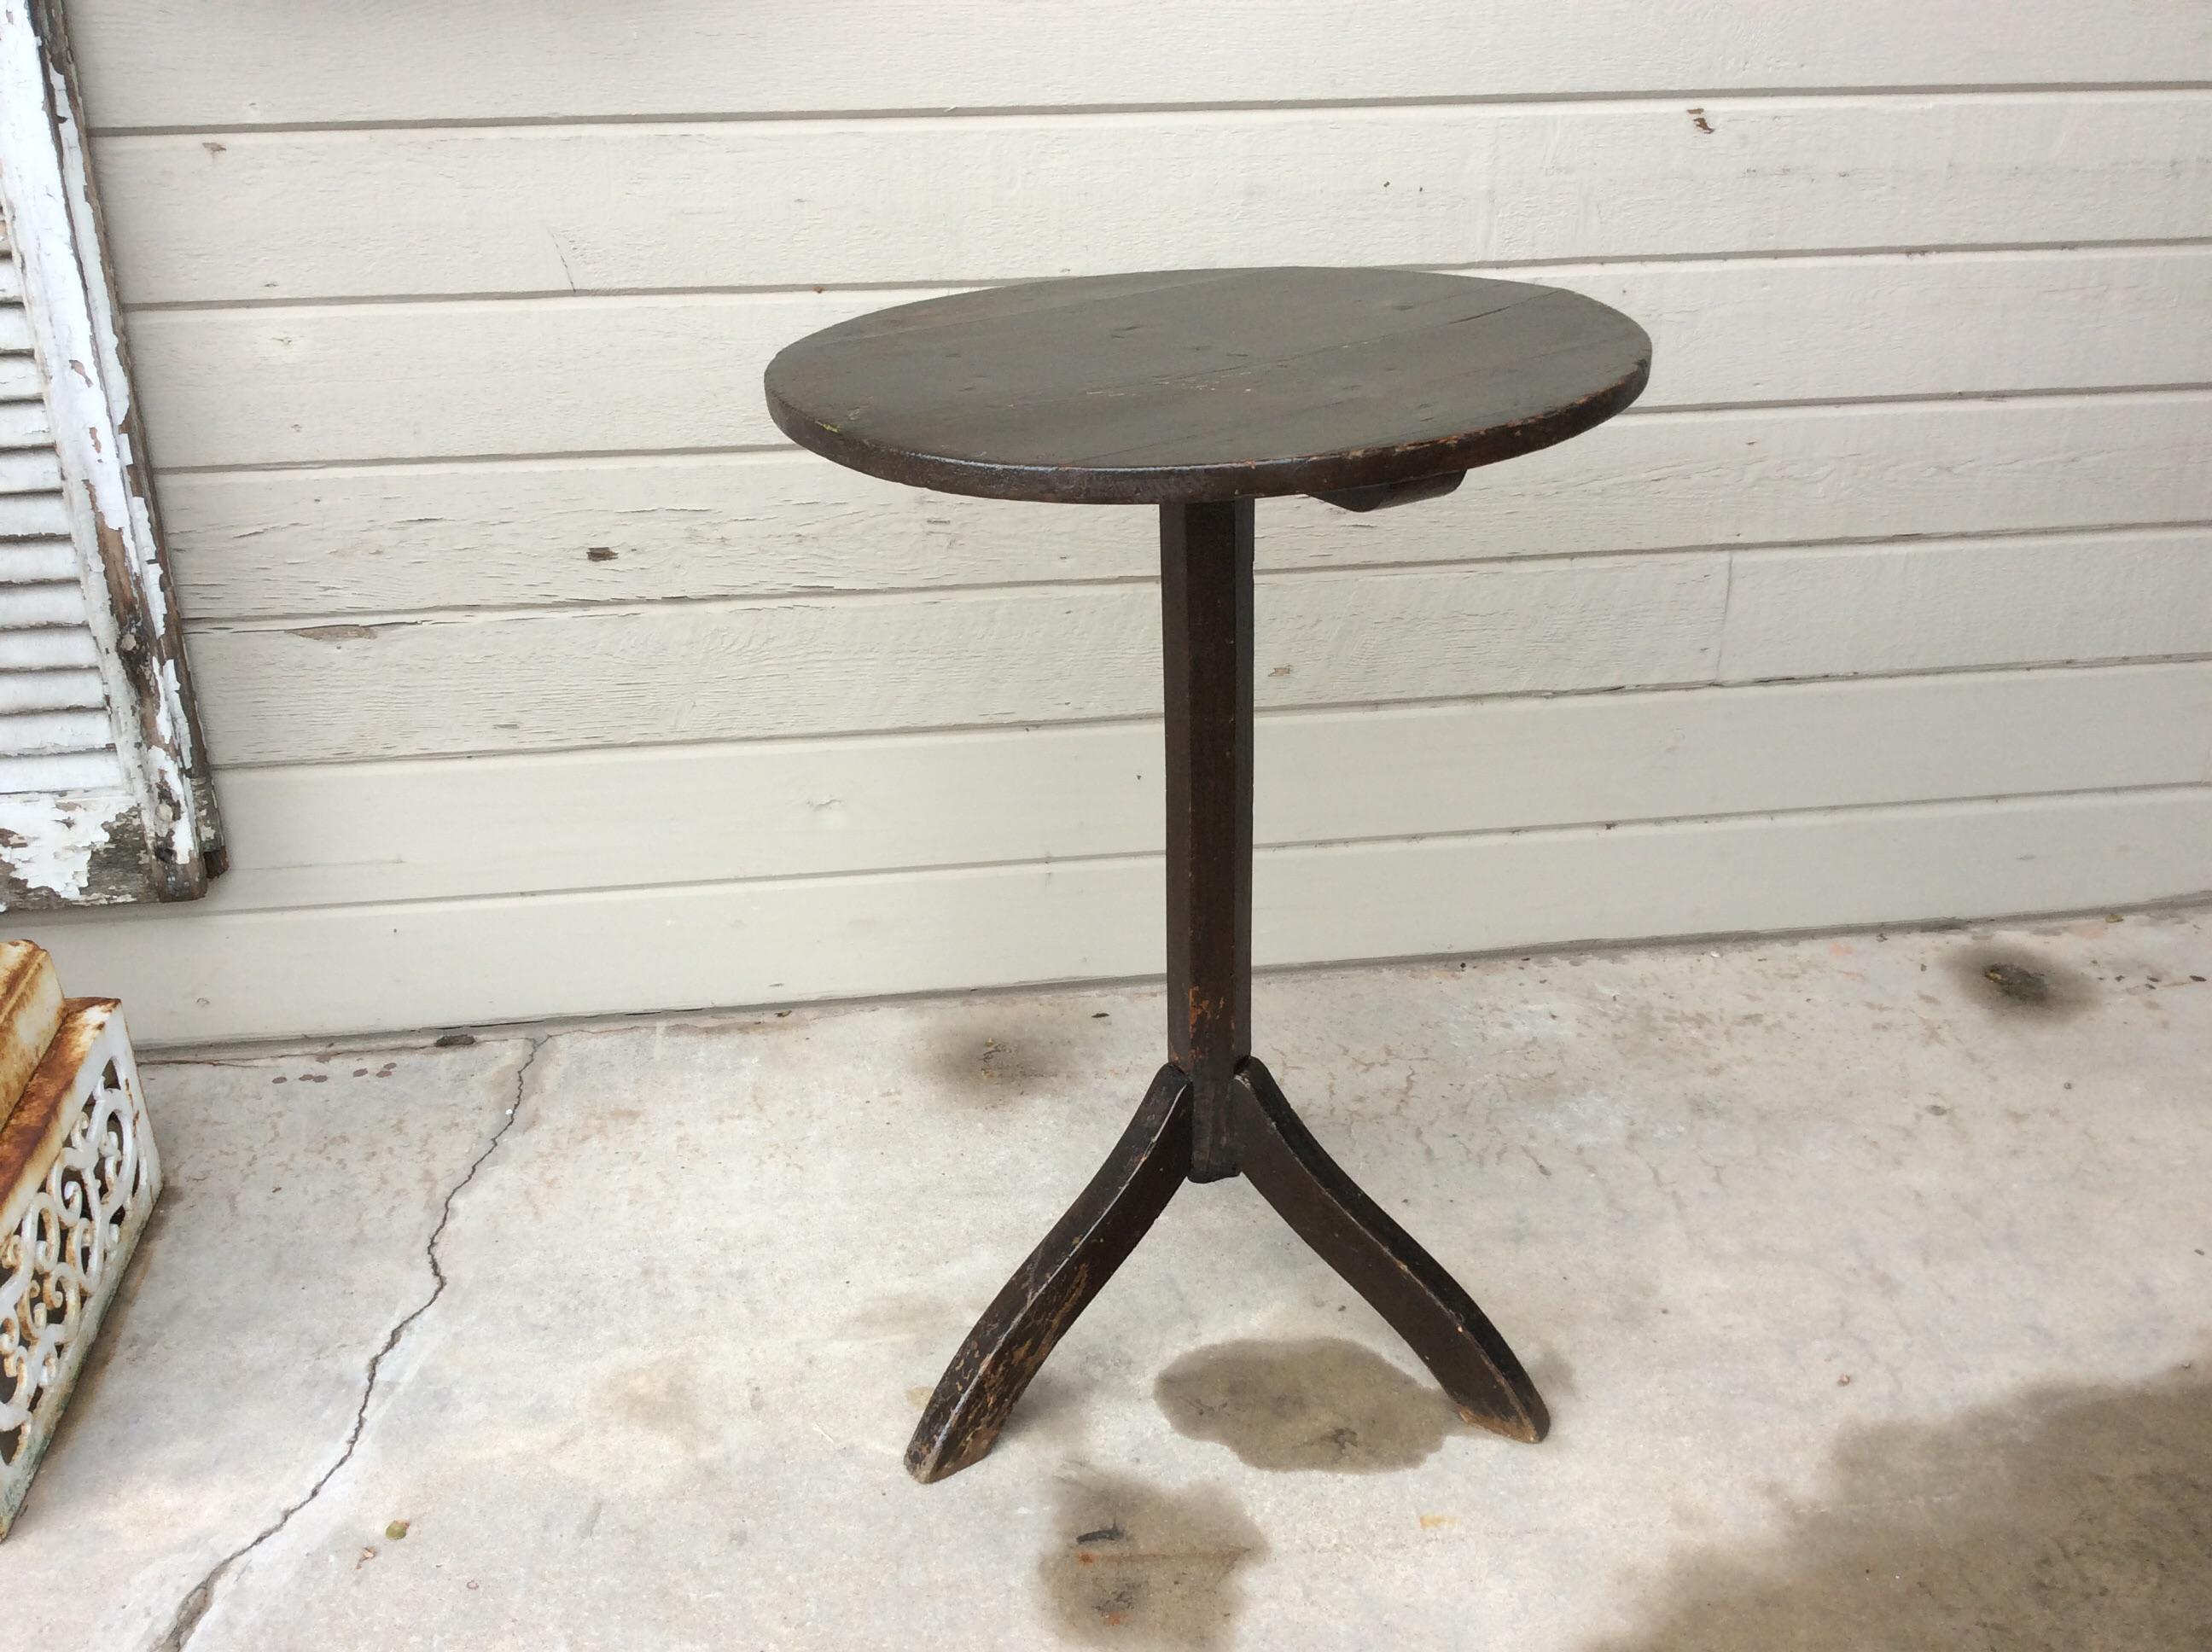 Found in the South of France, this Rustic French Pedestal Table will add French Country charm to any home interior. A perfect accent or side table, the imperfections only add to its charm.

19.75